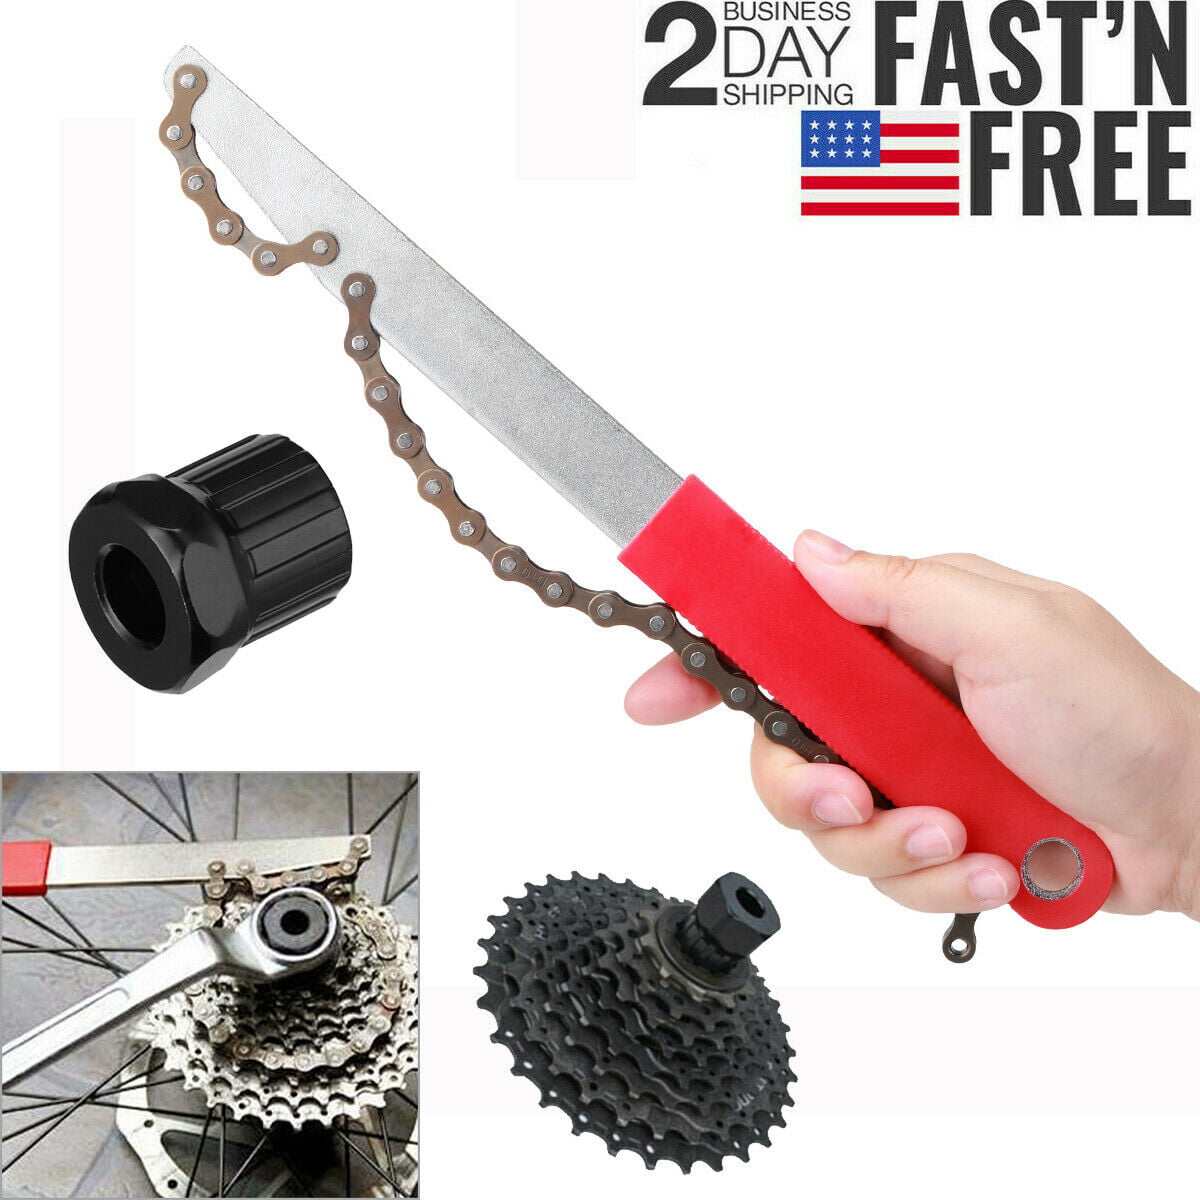 Freewheel Bike Chain Whip Cycle Bicycle Cassette Remover Repairing Hand Tool 